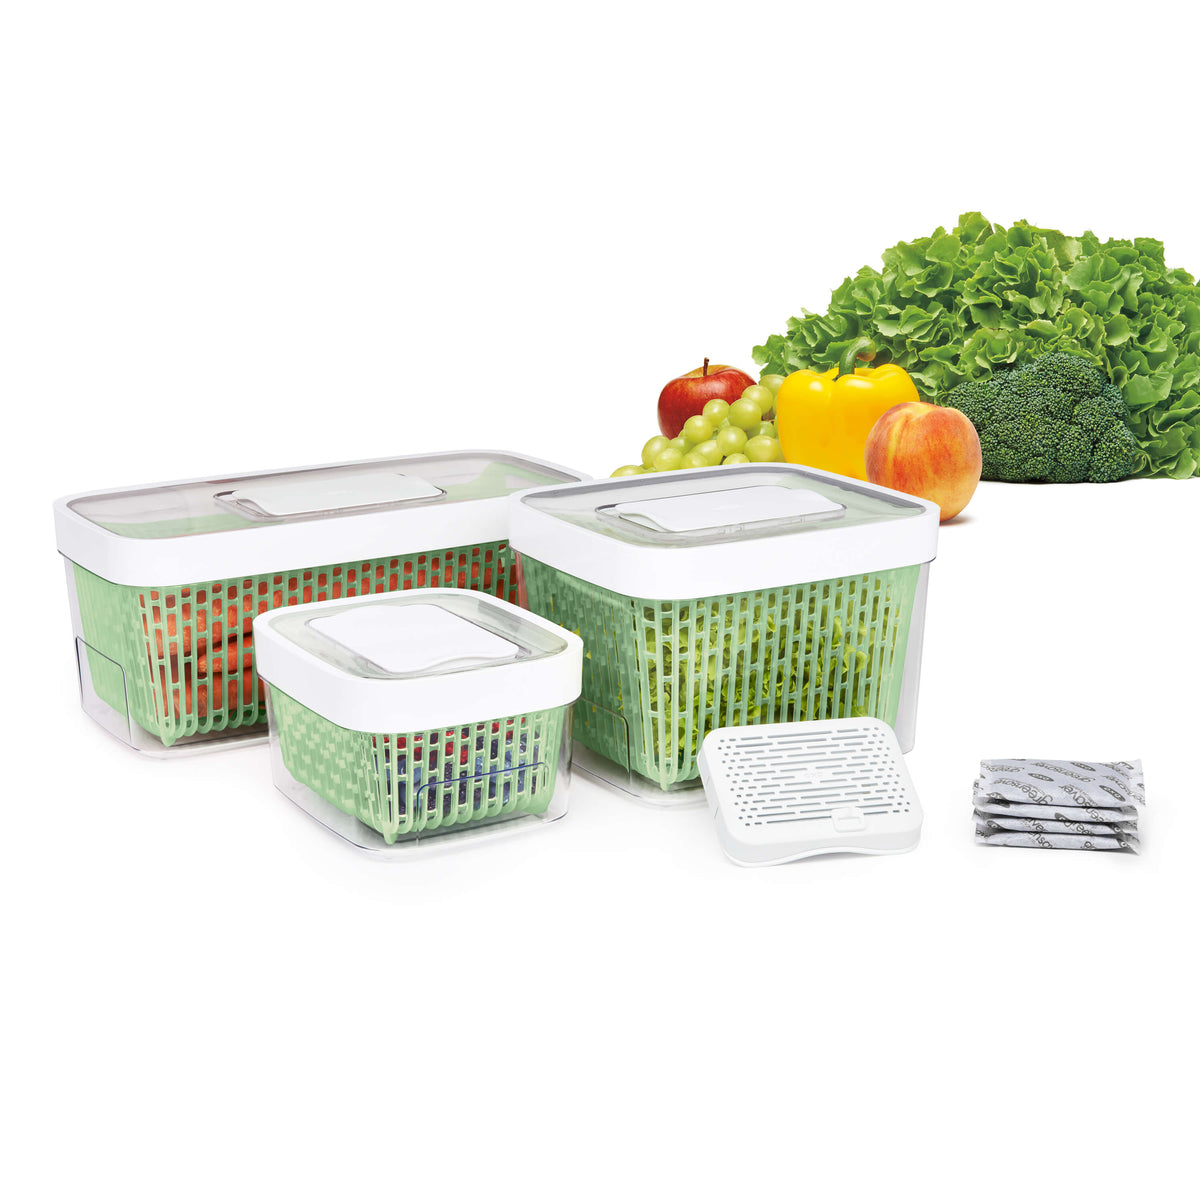 OXO Good Grips Greensaver Produce Keeper - 4L